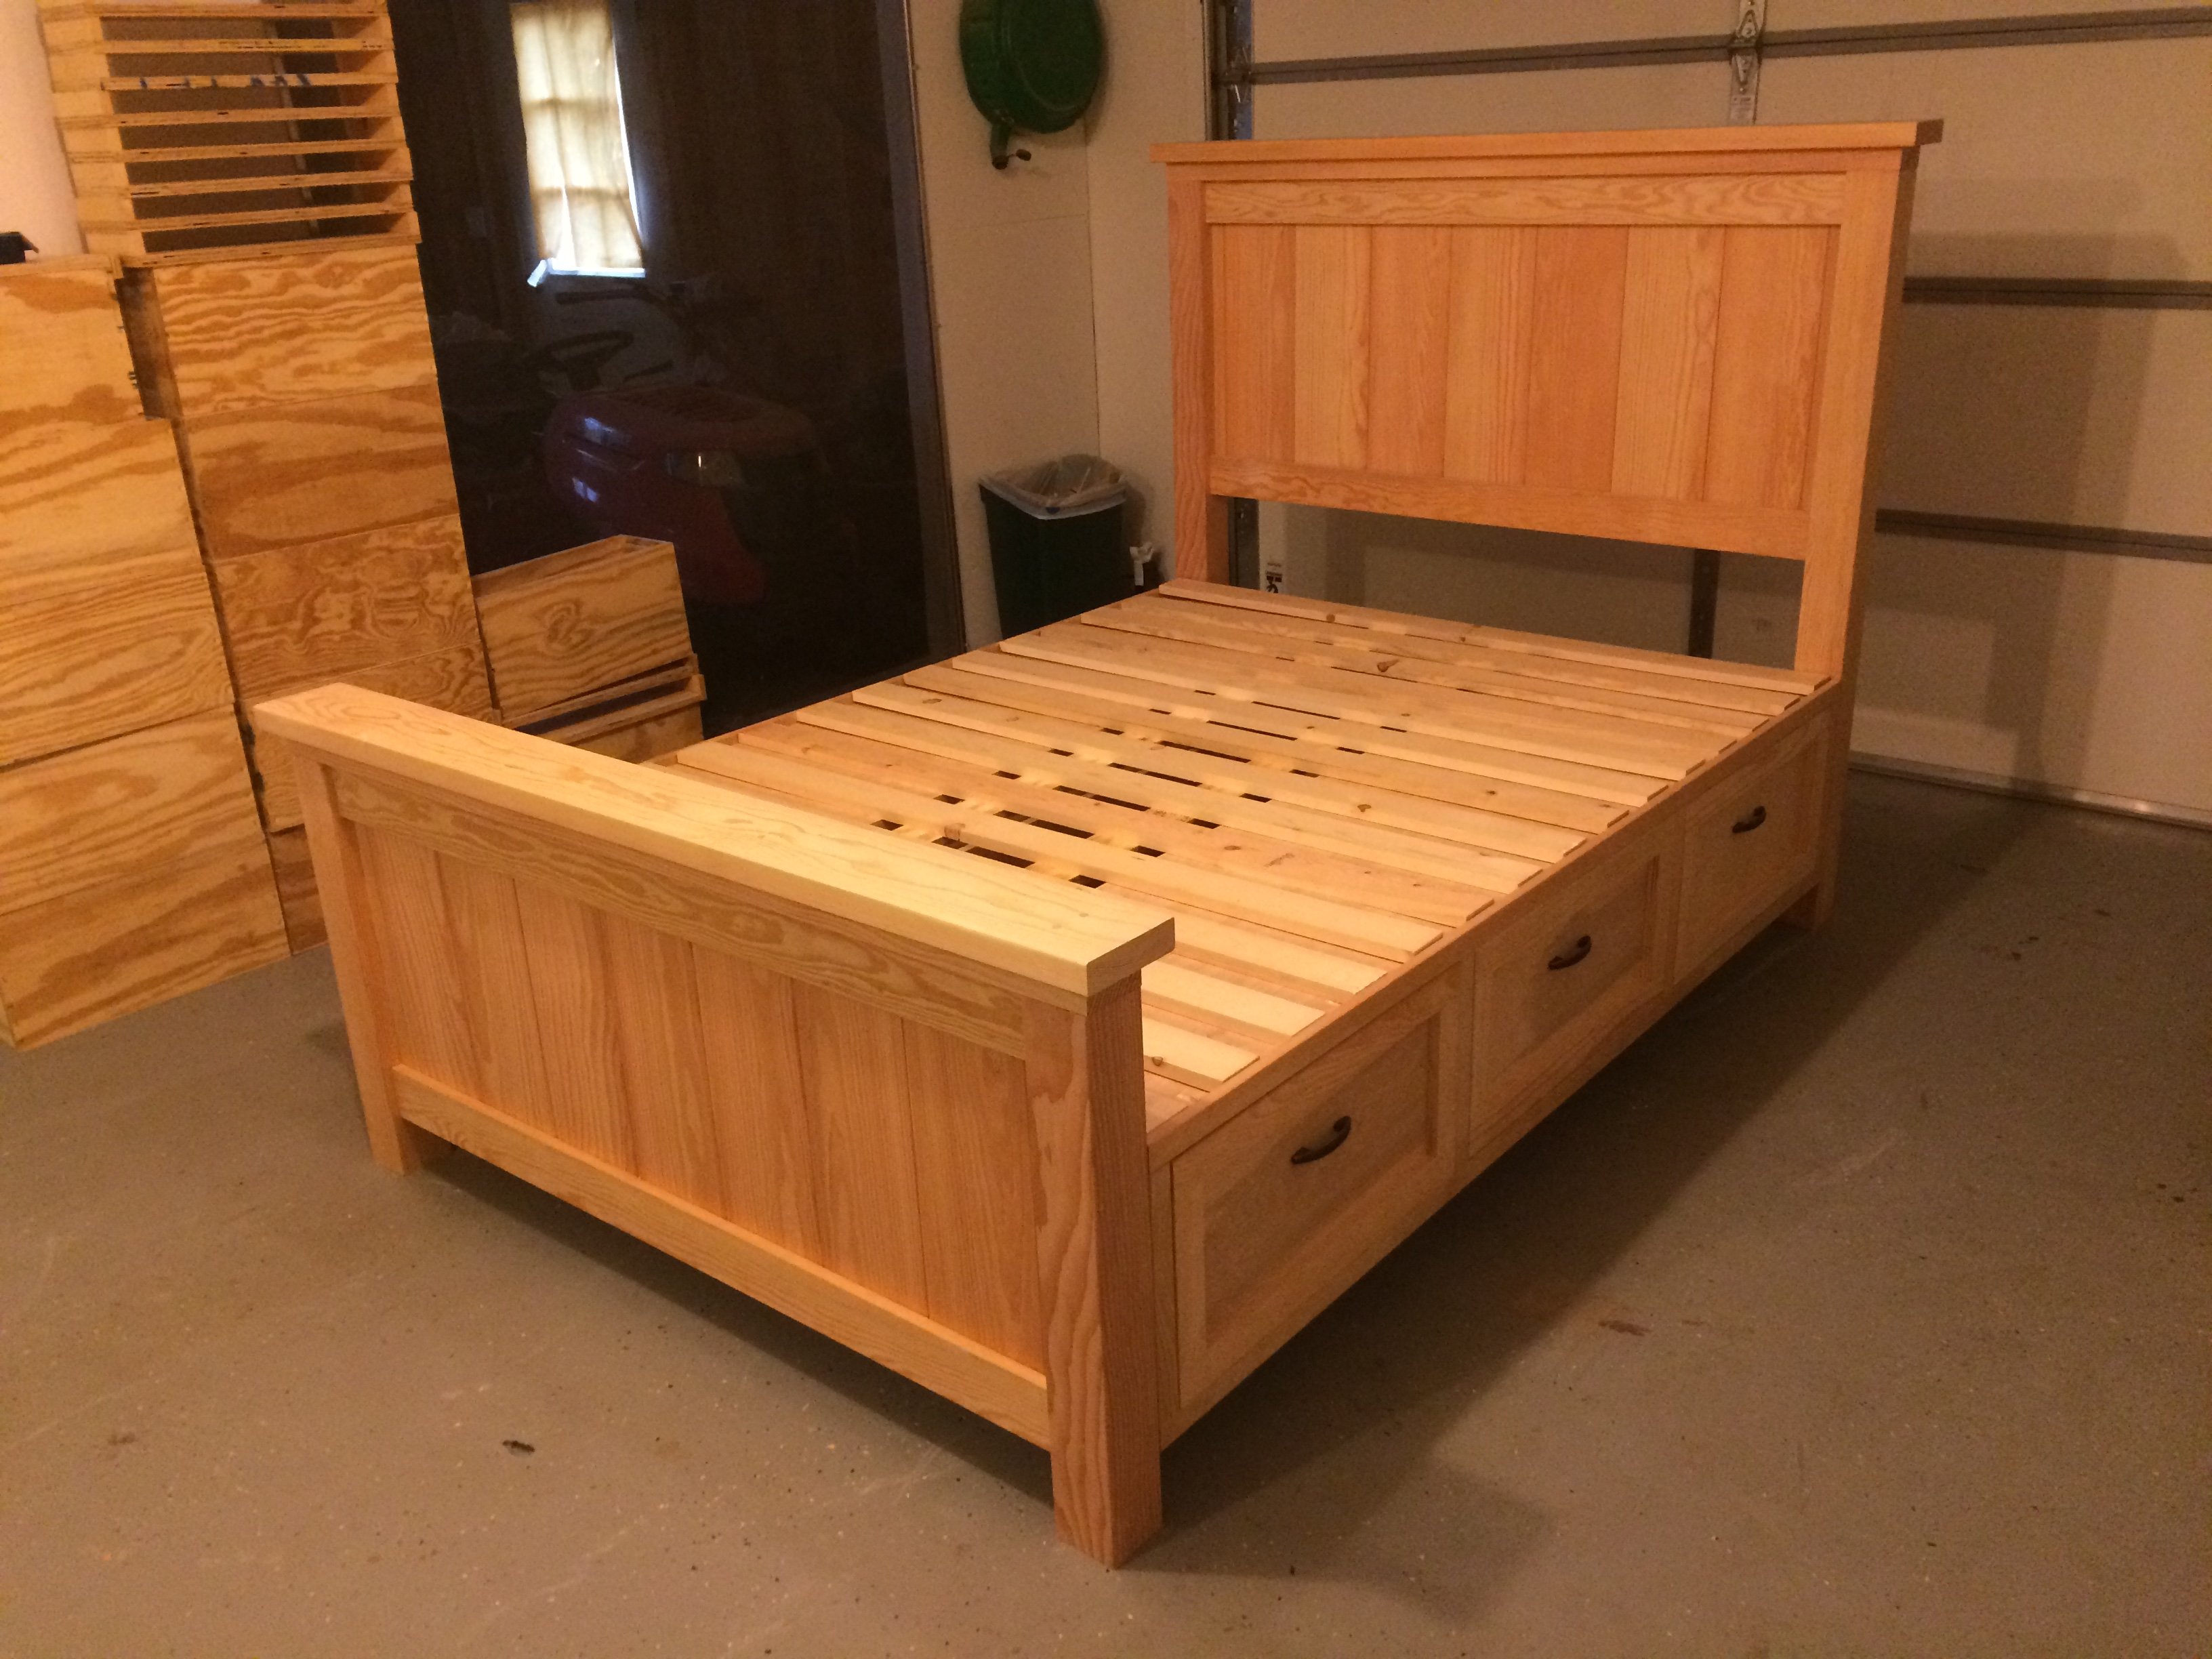 Farmhouse Storage Bed With Drawers, Raised Twin Bed Frame Plans